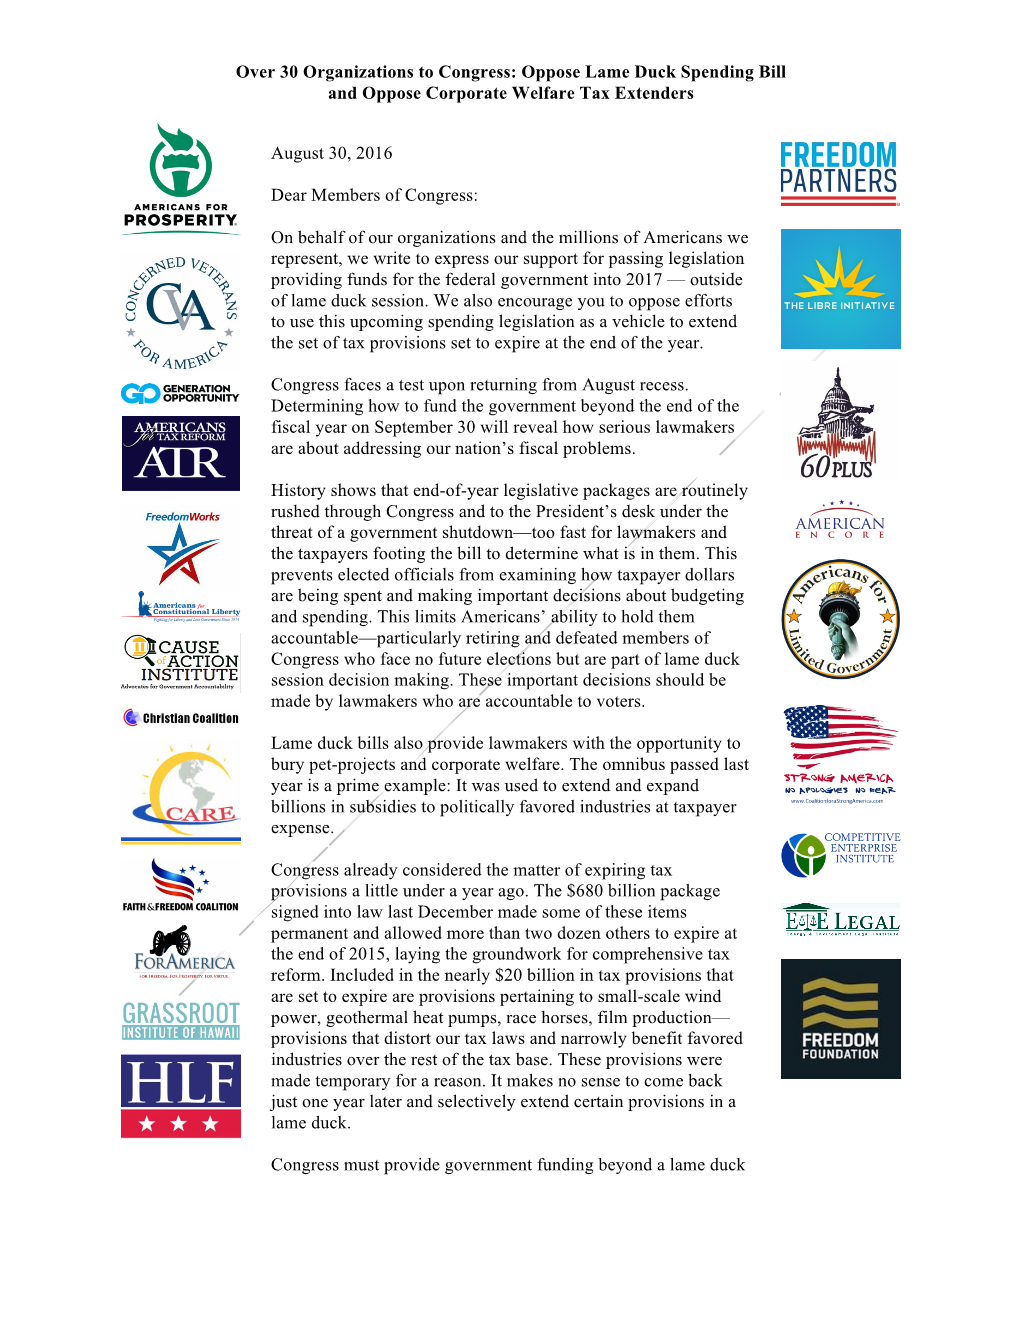 Over 30 Organizations to Congress: Oppose Lame Duck Spending Bill and Oppose Corporate Welfare Tax Extenders